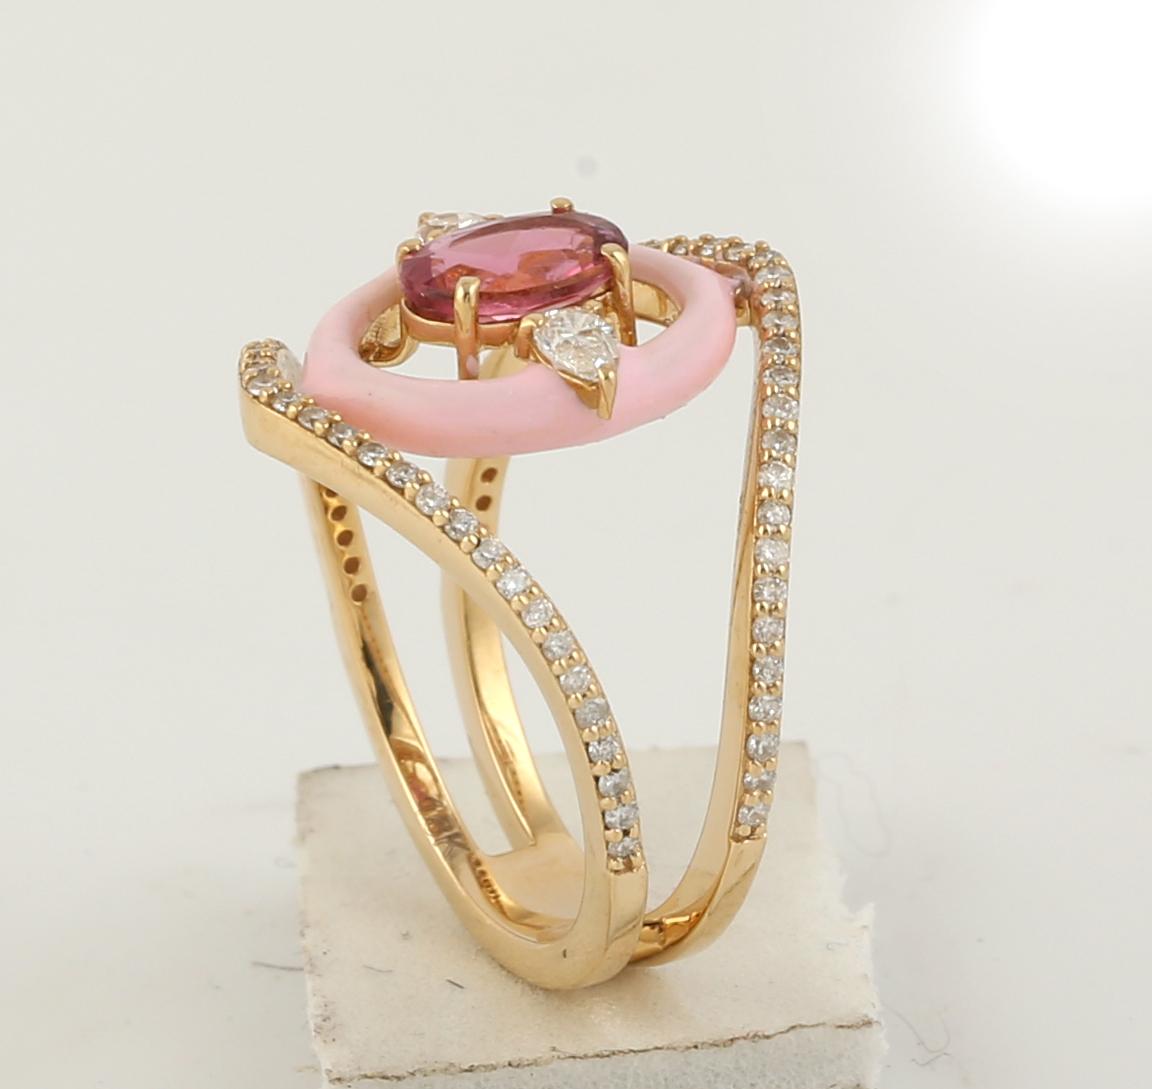 Mixed Cut Rose Cut Pink Tourmaline Ring w/ Pink Enamel & Diamonds Made In 18k Yellow Gold For Sale